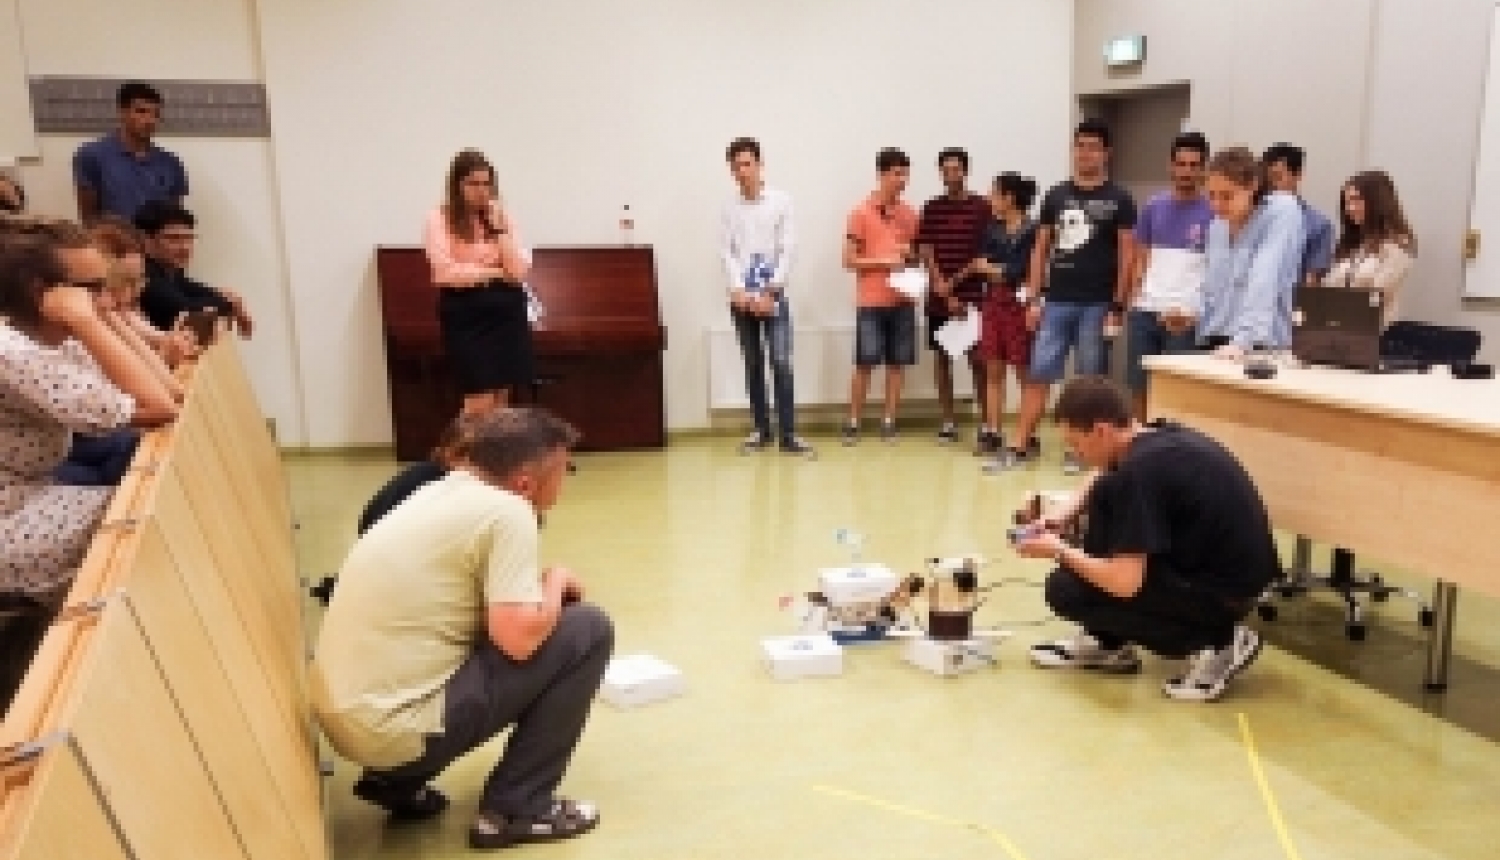 Foreign students learn robotics and get to know Latvia